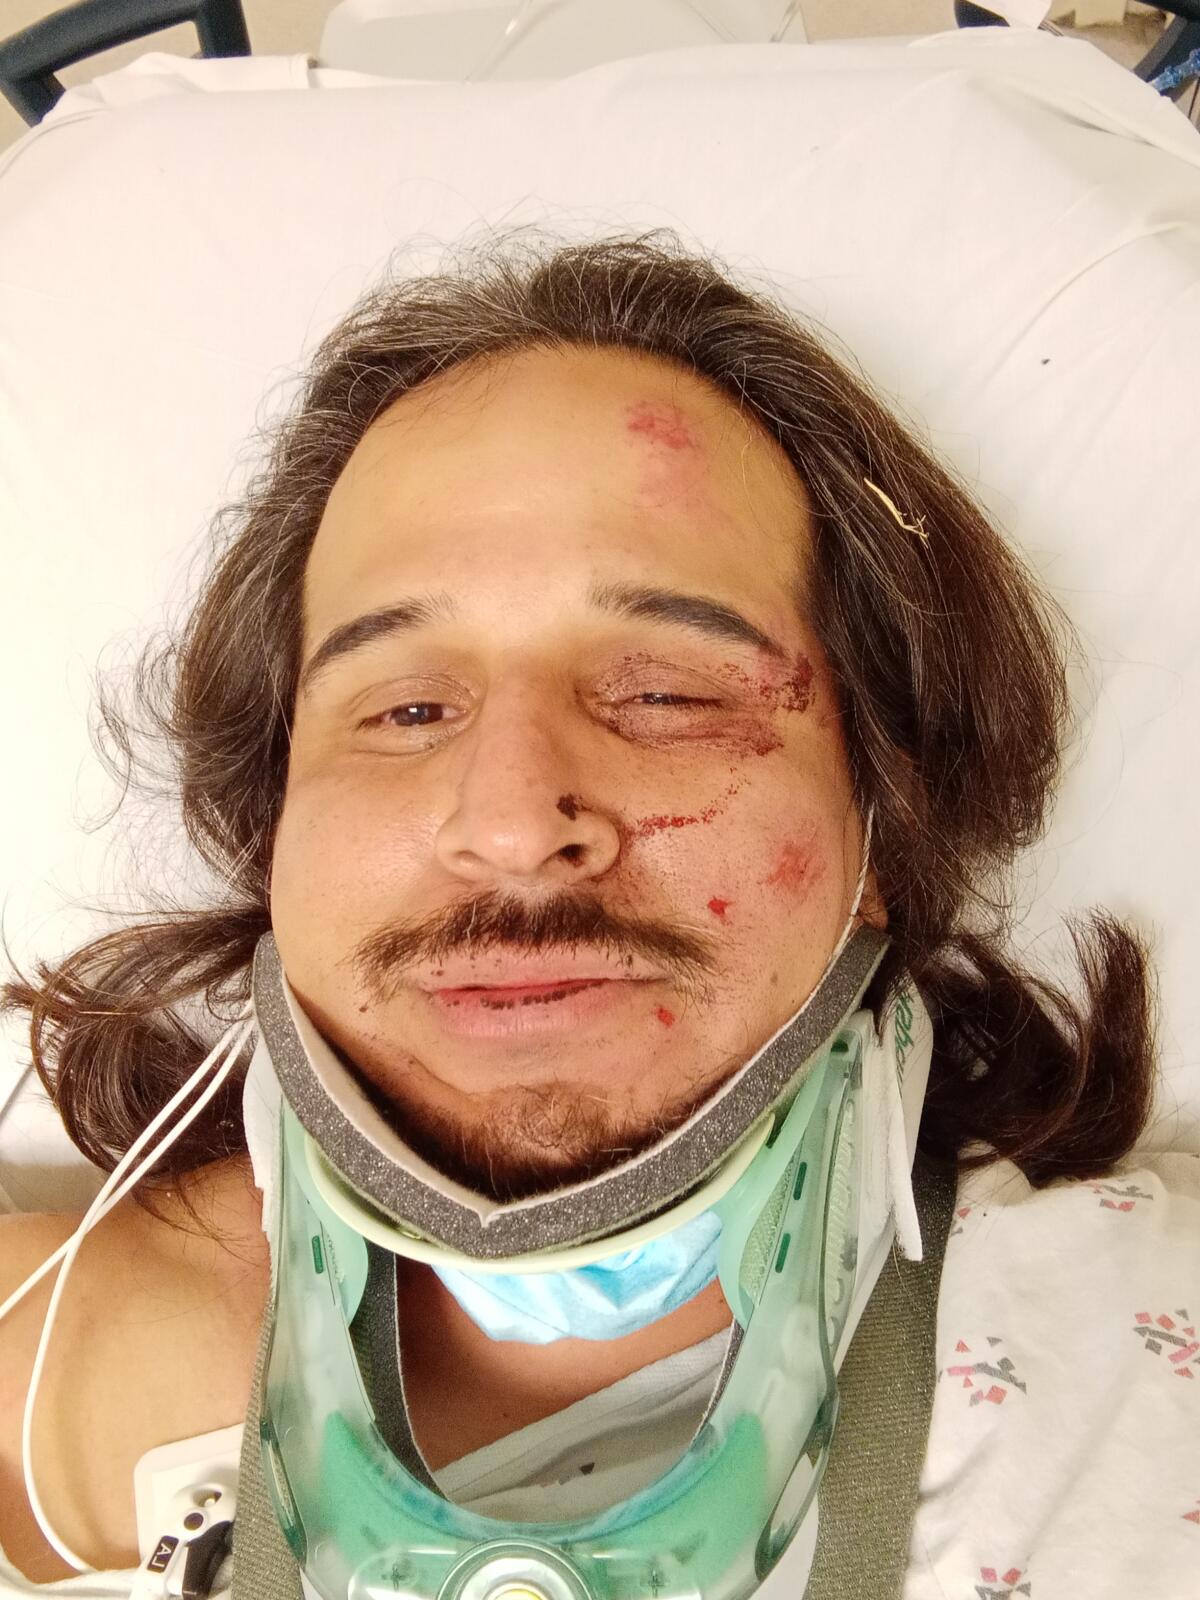 A man with facial injuries in a hospital bed